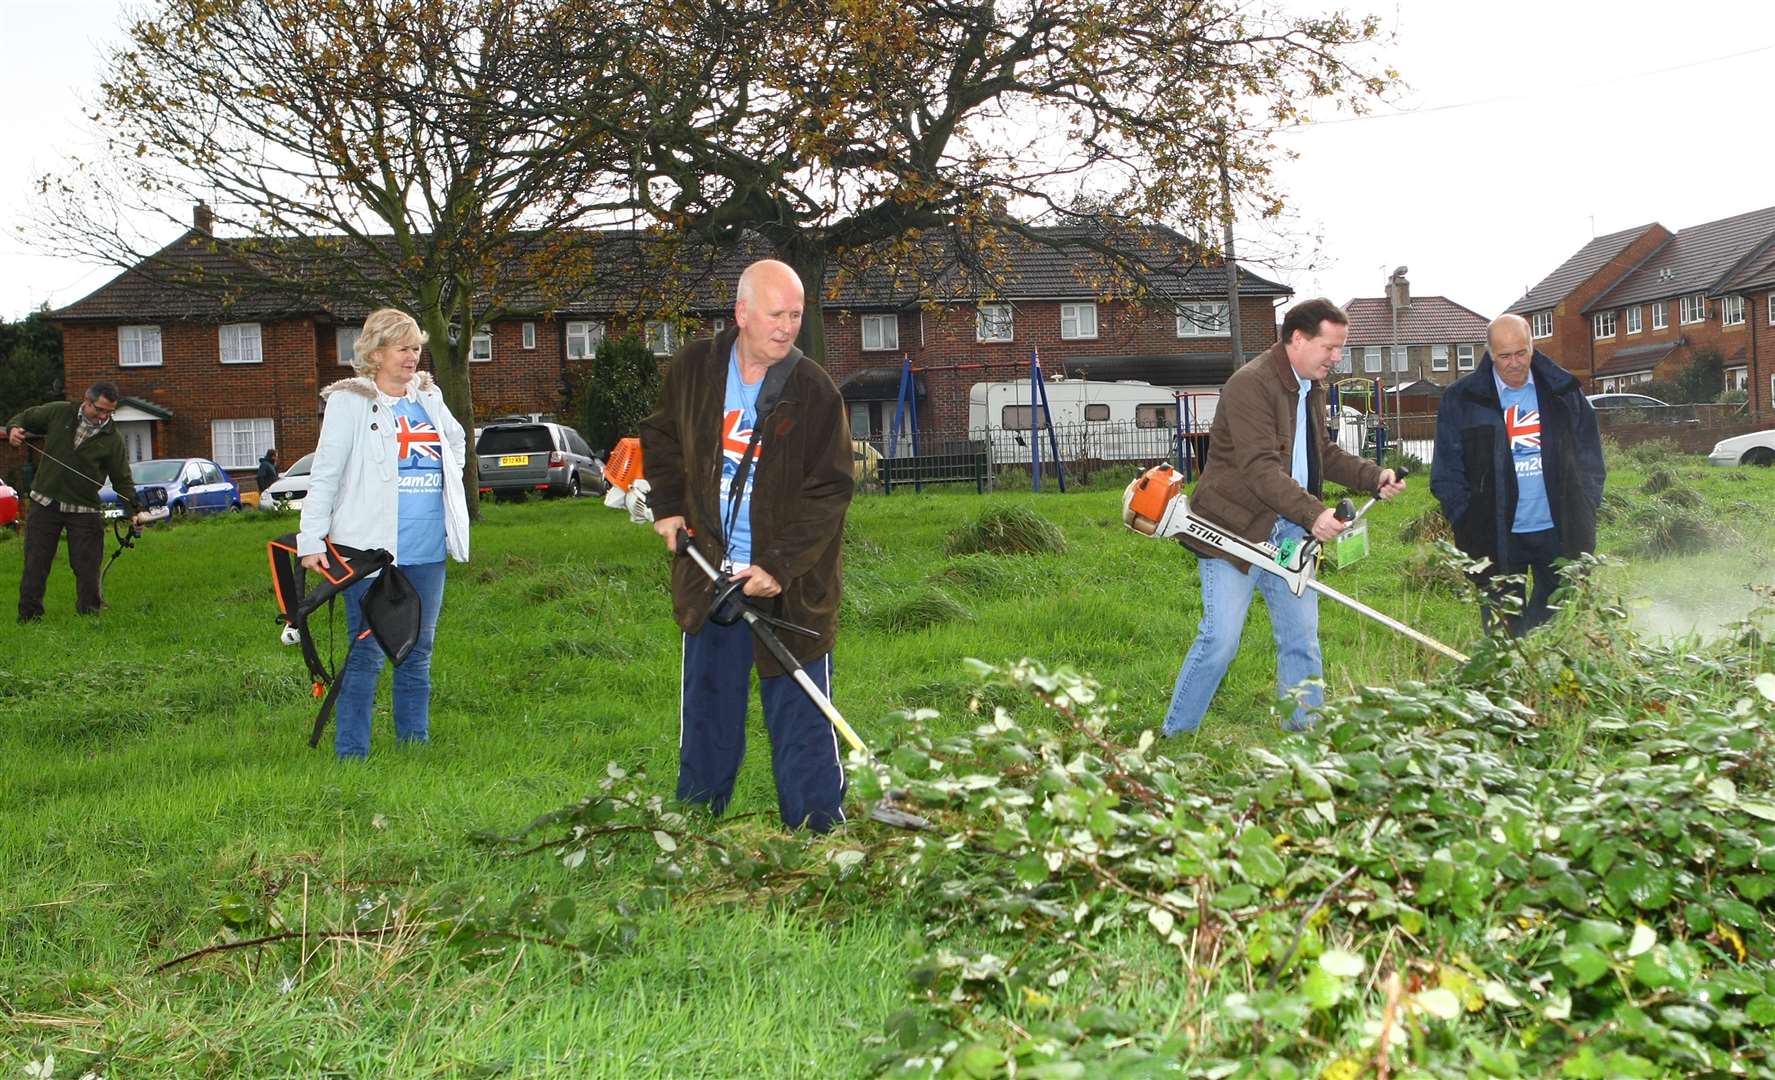 Charlie Elphicke and volunteers cut and clear the grass area in Freemens Way